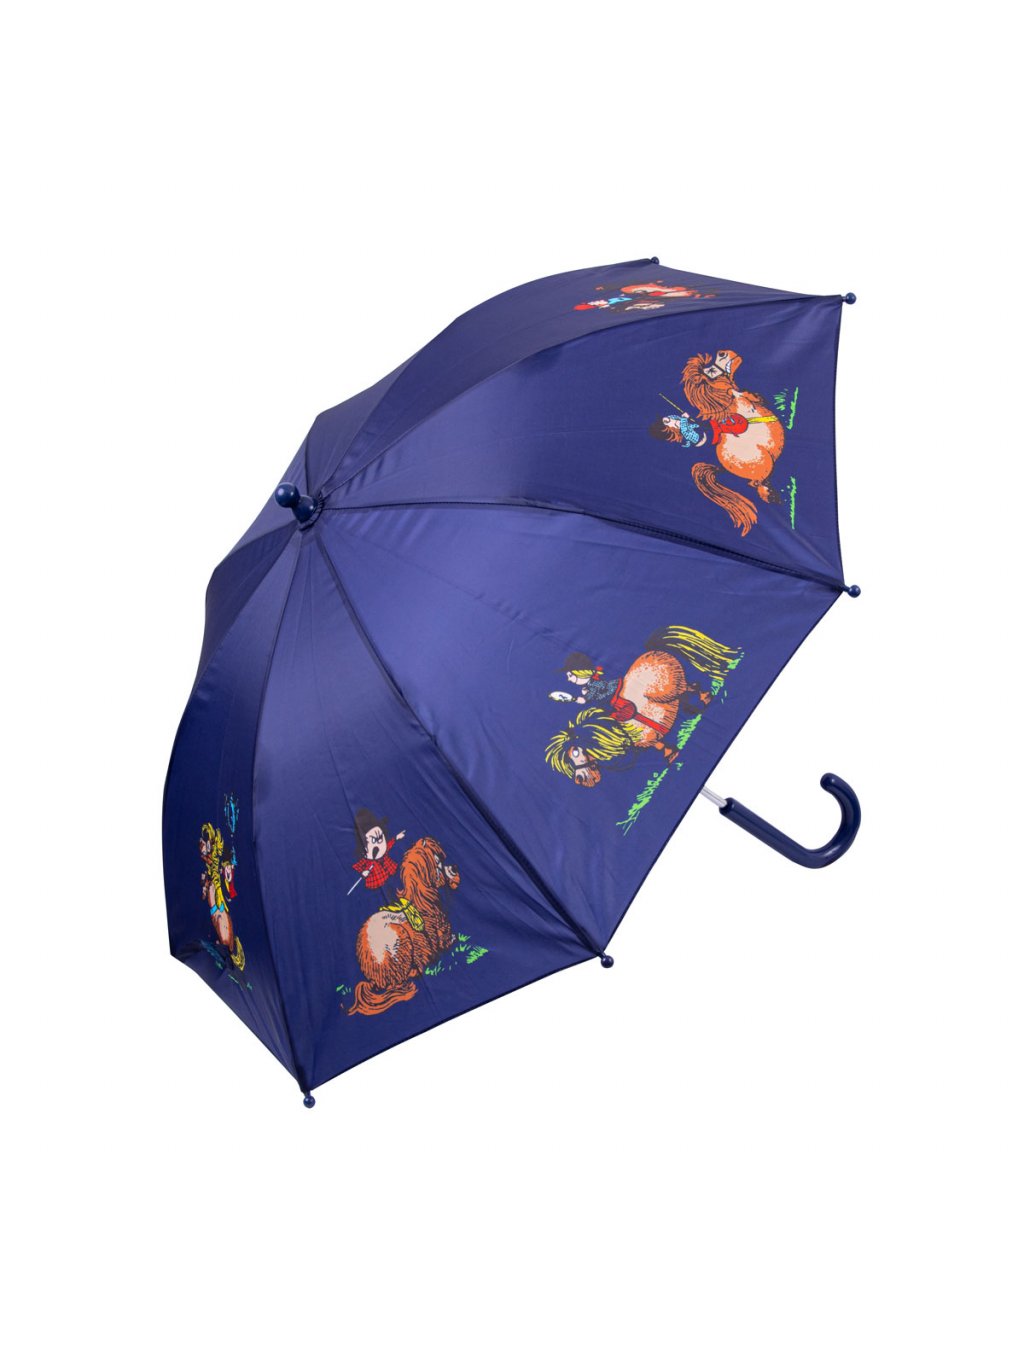 PR 36647 Hy Equestrian Thelwell Collection Umbrella 01